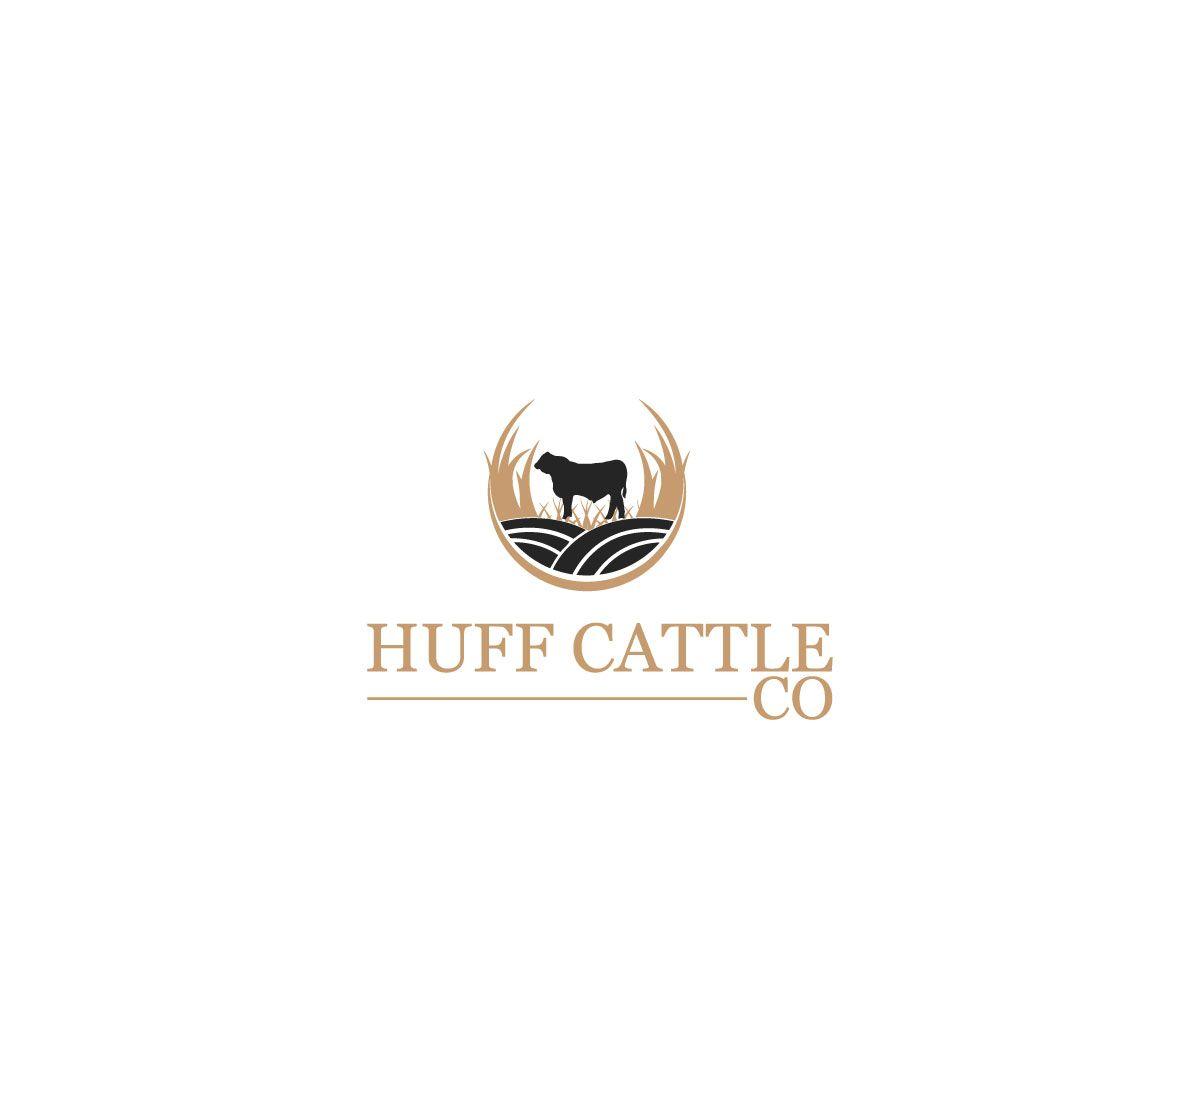 Huff Logo - Professional, Serious Logo Design for Huff Cattle Co